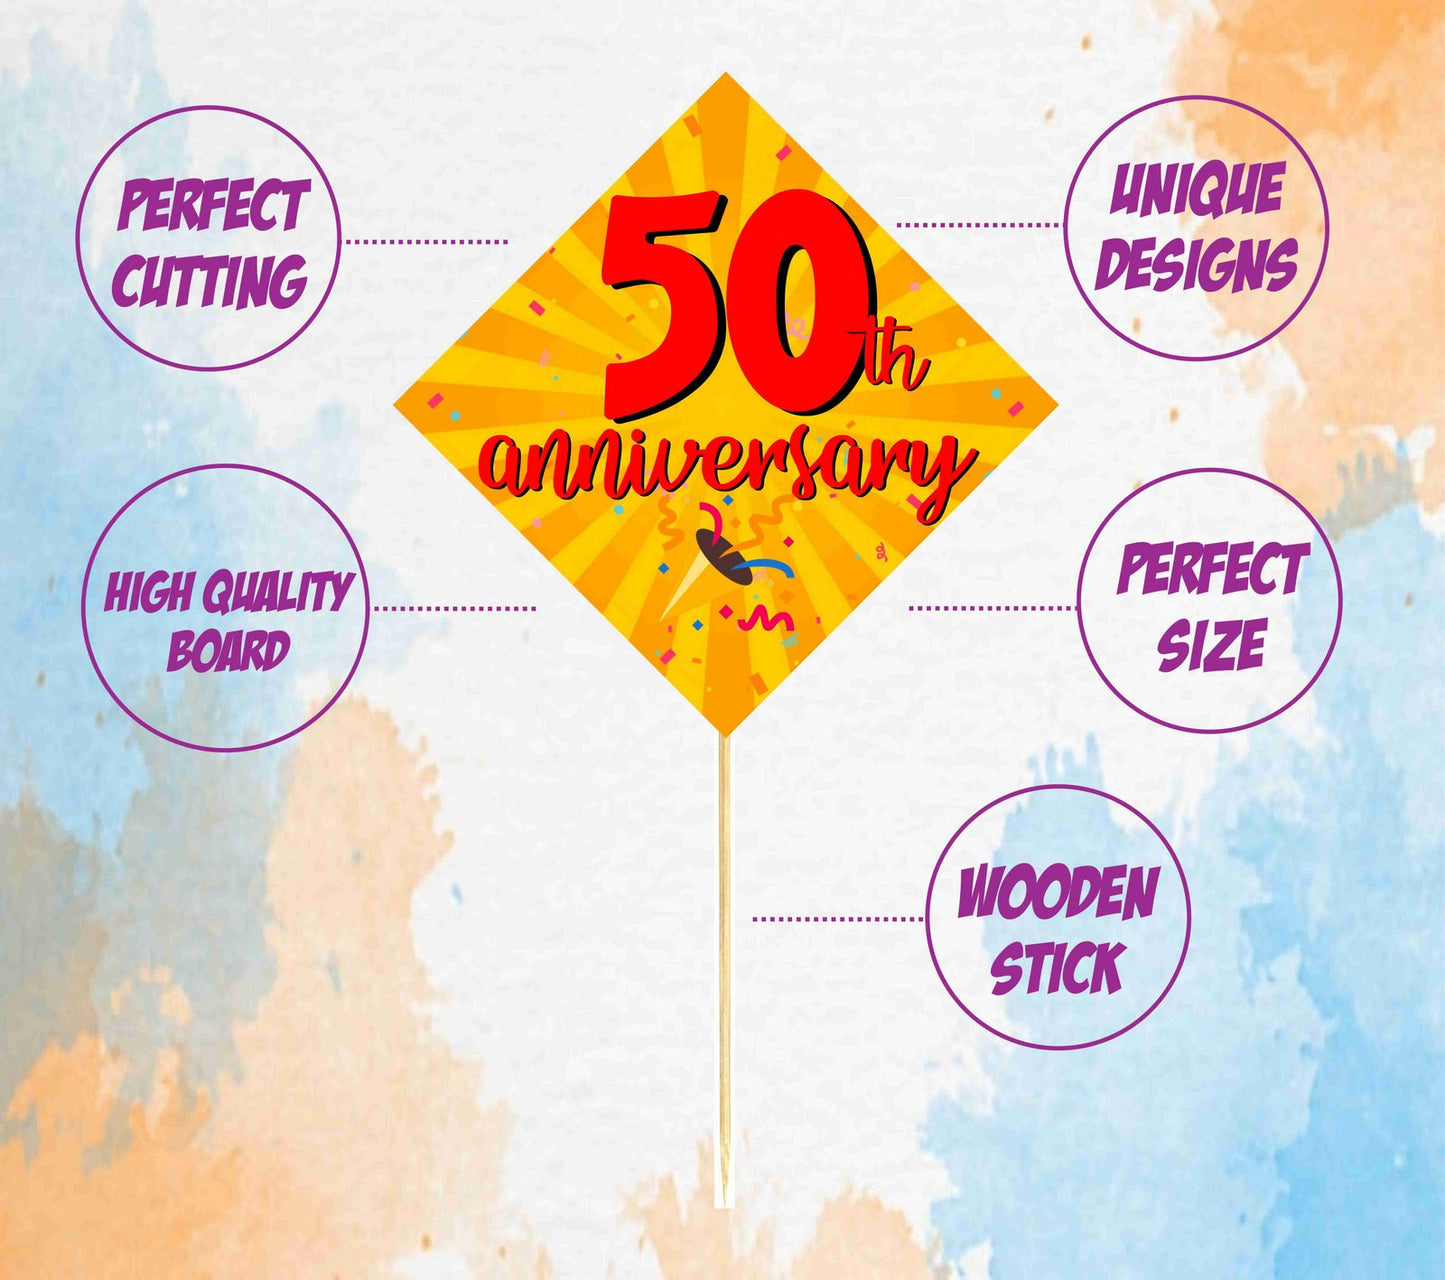 50th  Anniversary Theme Props Anniversary Decoration Backdrop Photo Shoot, Photo Booth Party Item for Adults and Kids